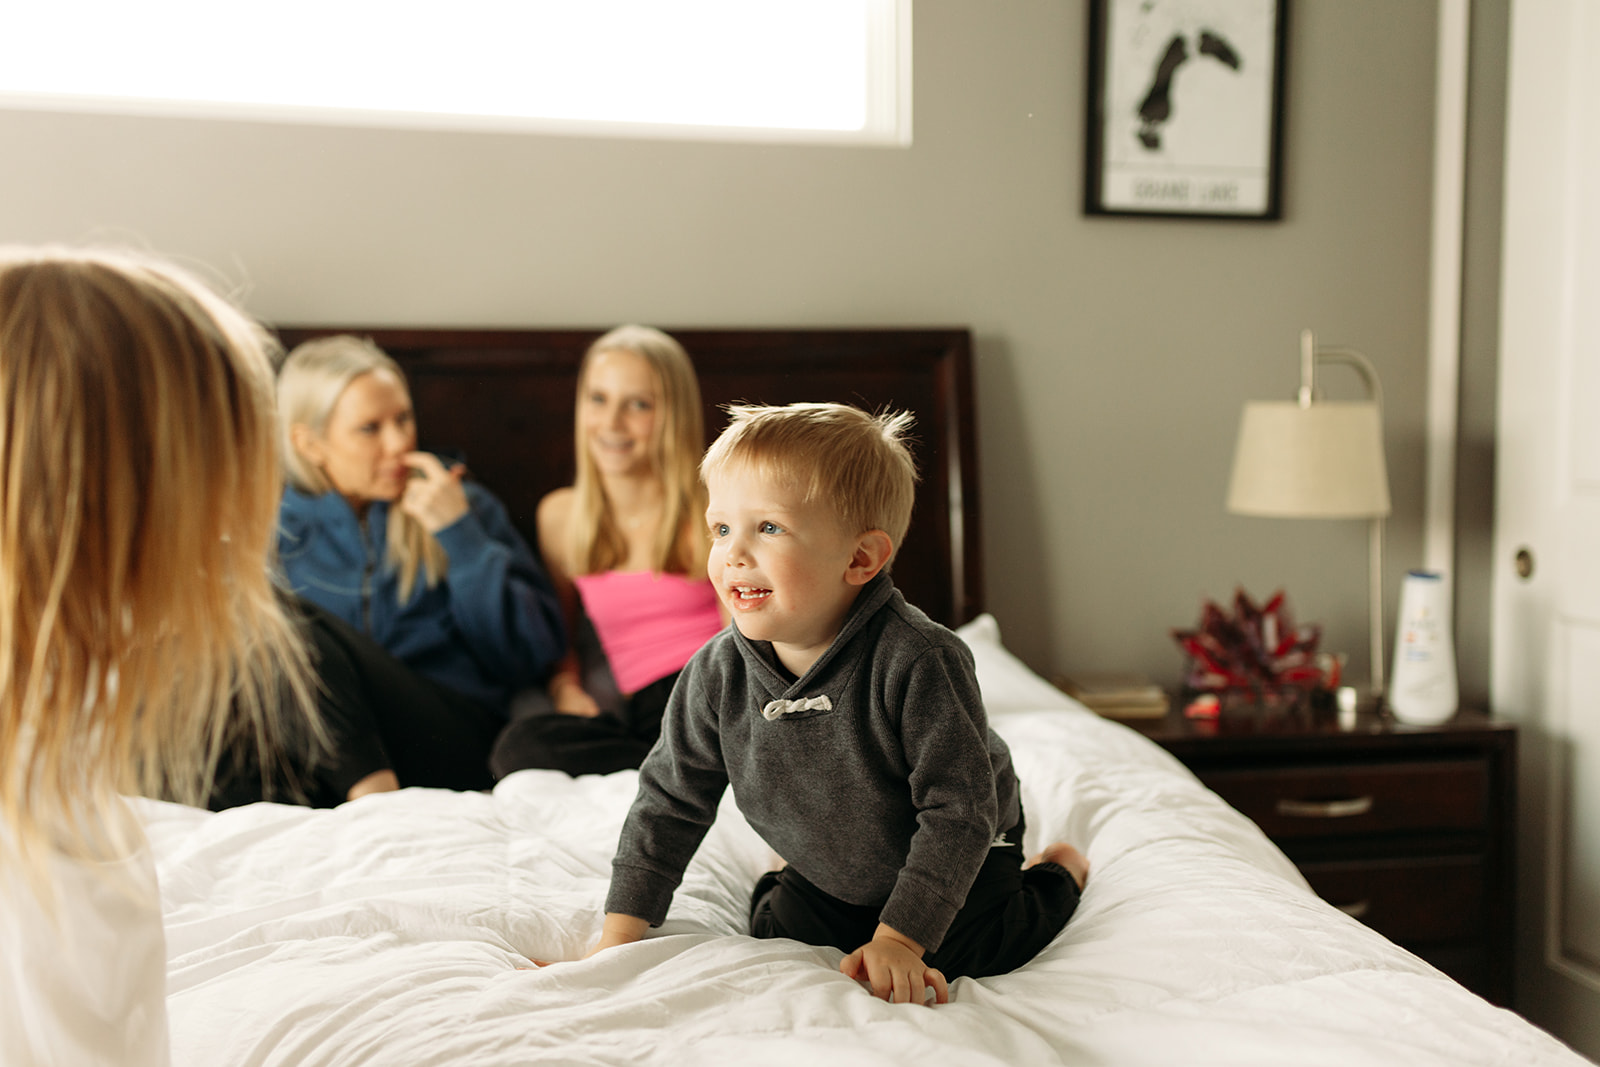 A day in the life, documentary family photography at home during winter